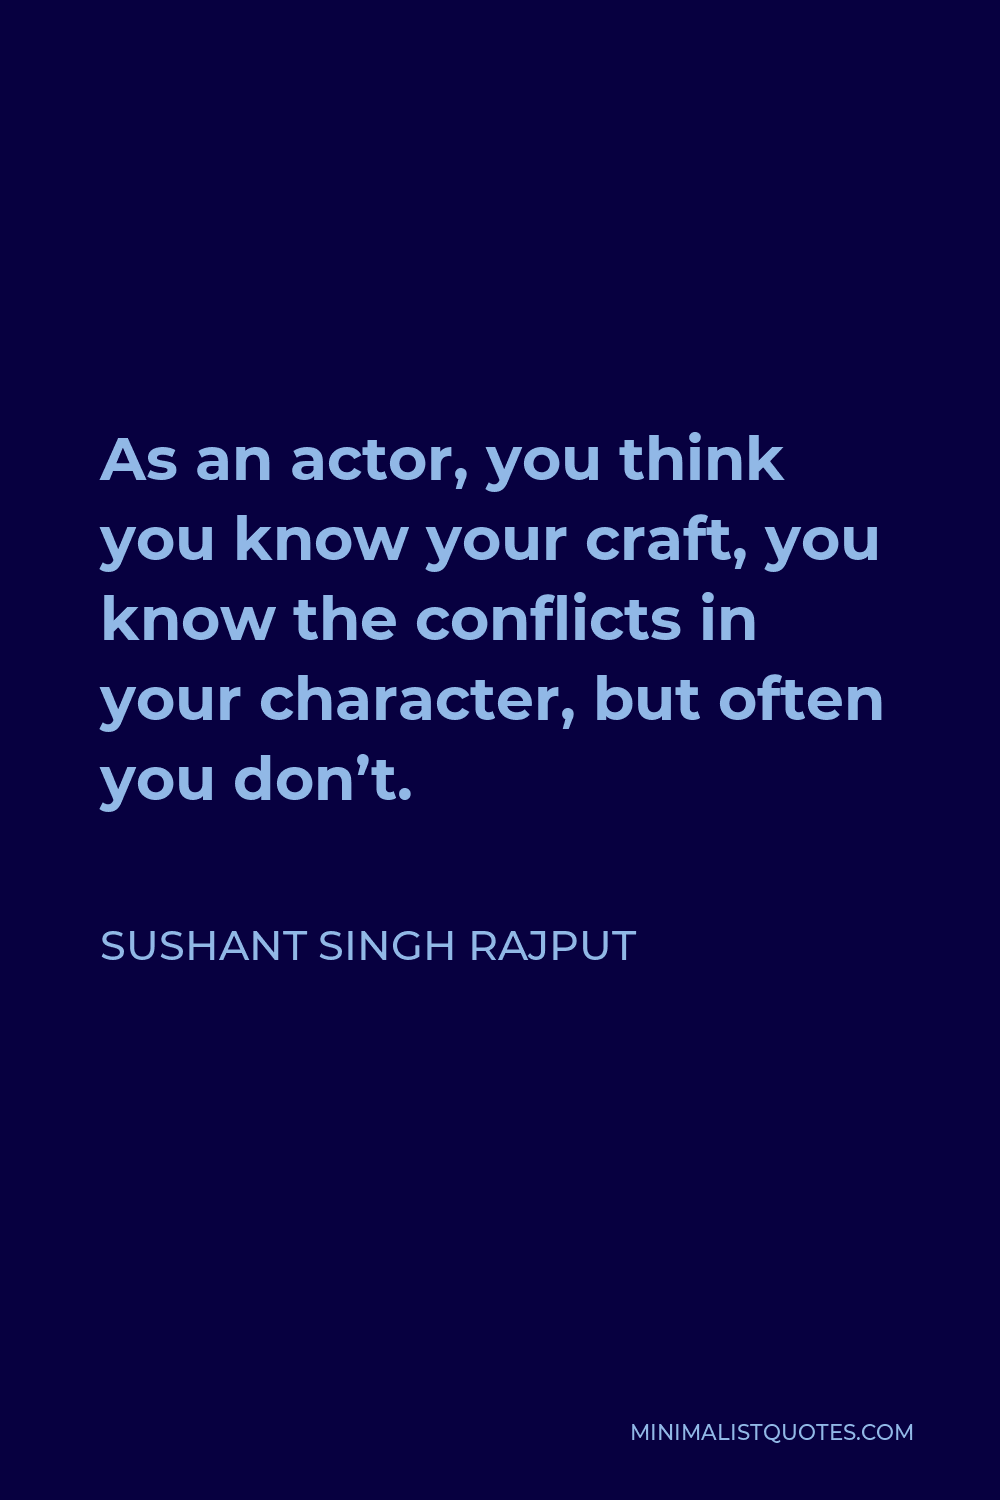 Sushant Singh Rajput Quote - As an actor, you think you know your craft, you know the conflicts in your character, but often you don’t.